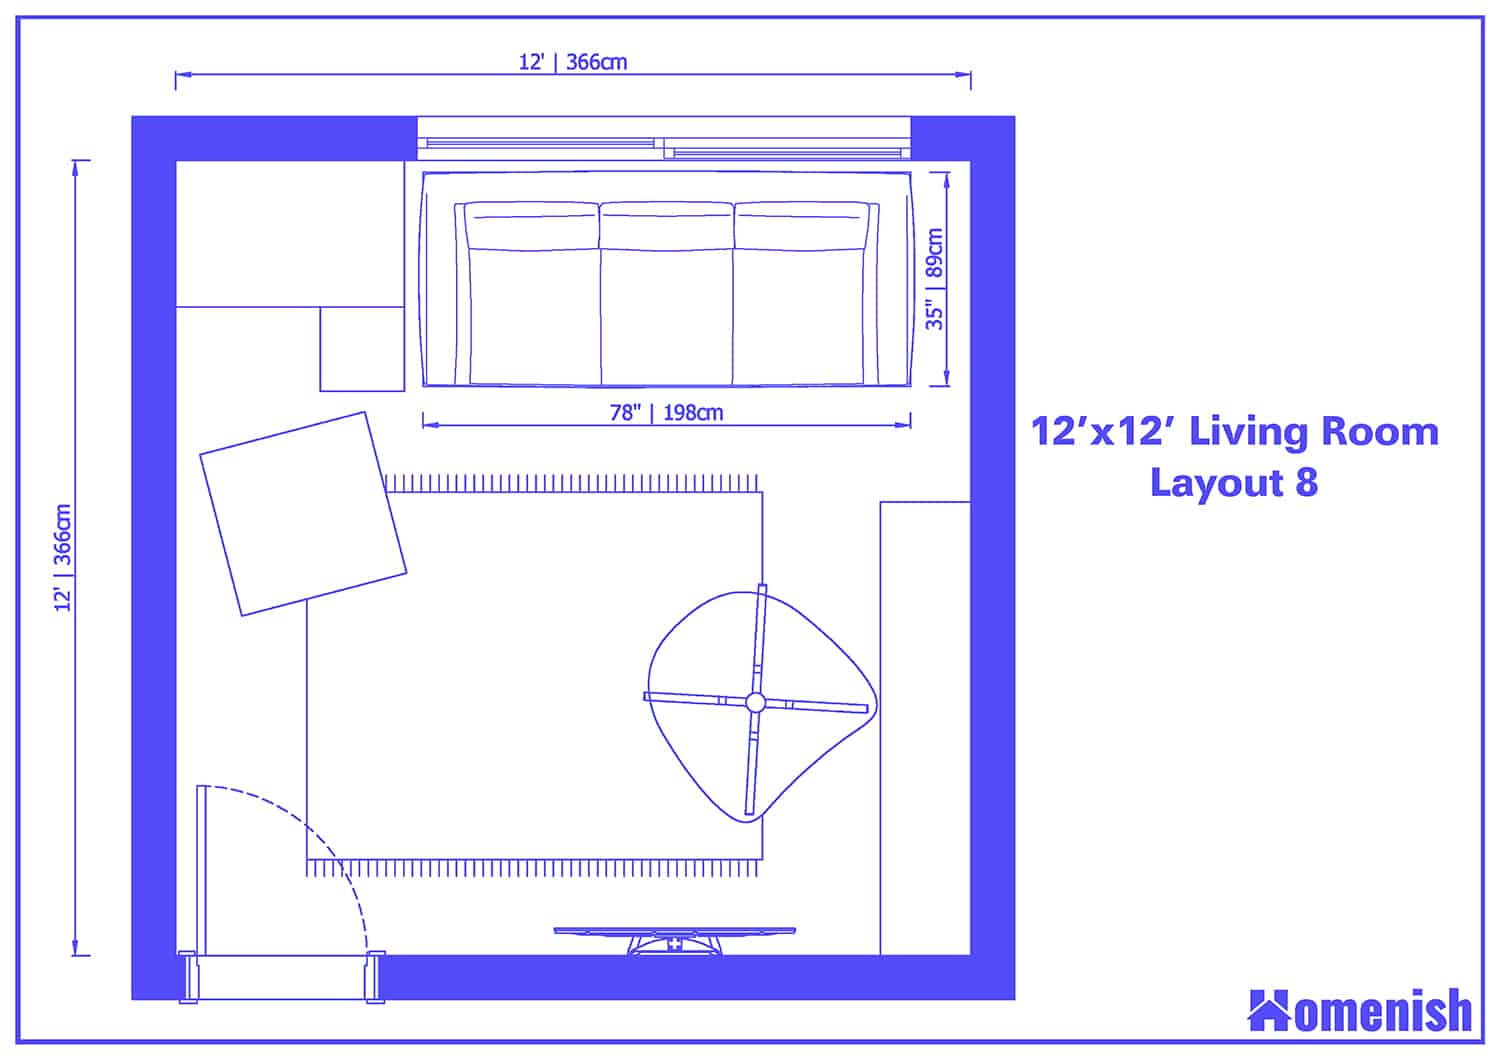 15 X 12 Living Room Layout